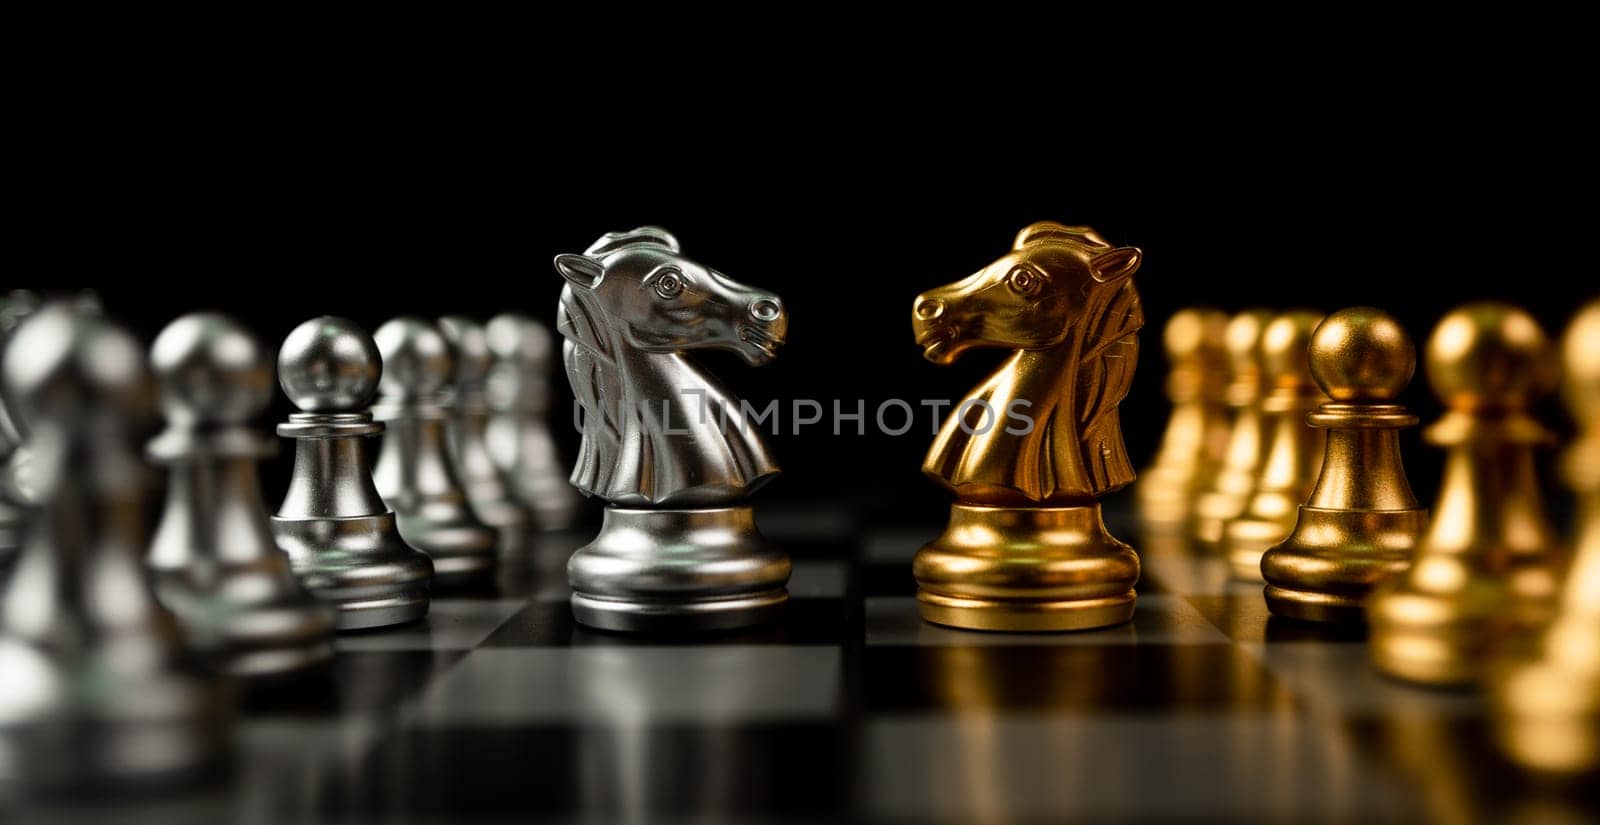 Golden and silver horse chess pieces Invite face to face and There are chess pieces in the background. Concept of competing, leadership and business vision for a win in business games